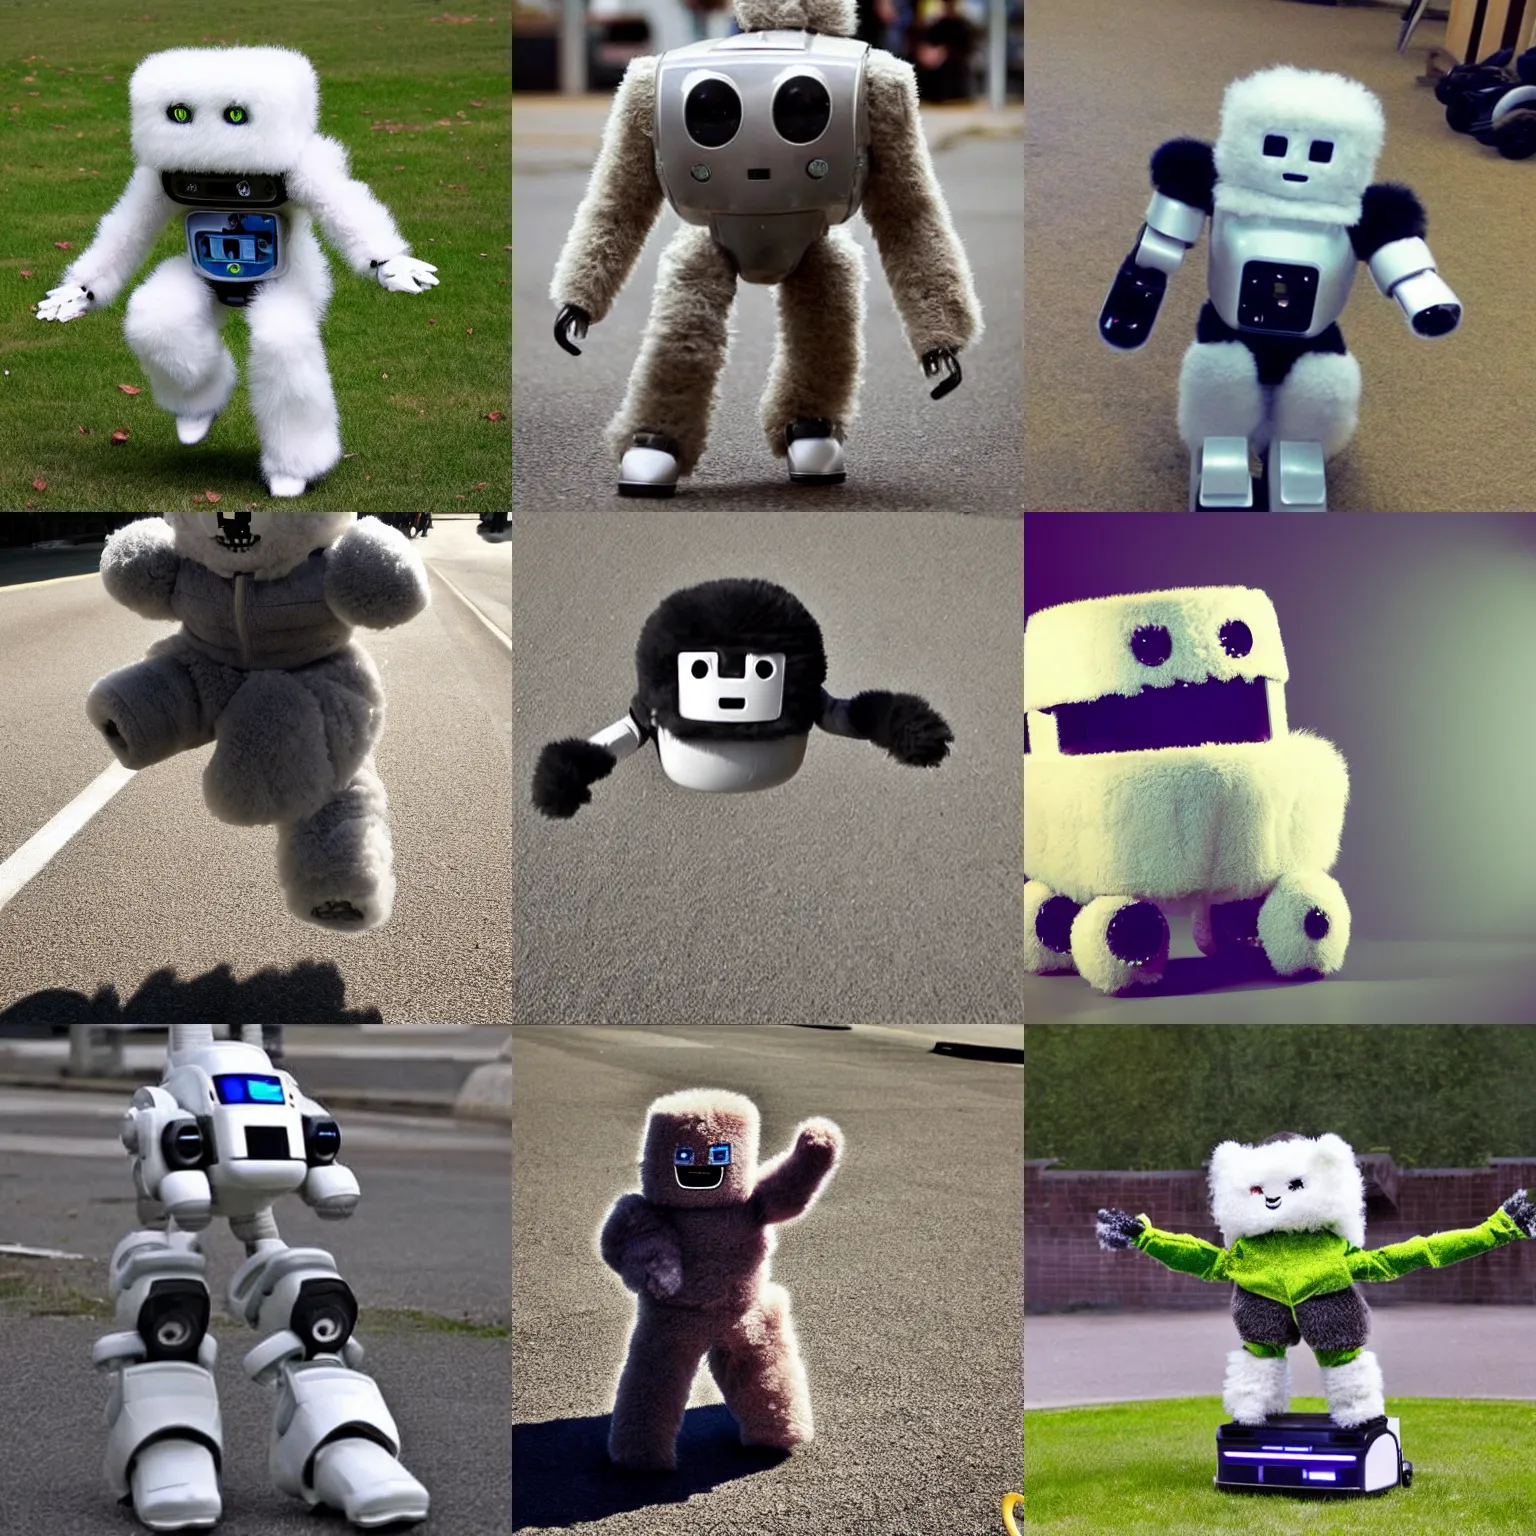 Prompt: < photo attention - grabbing > adorable fluffy robot jumping for joy < / photo >